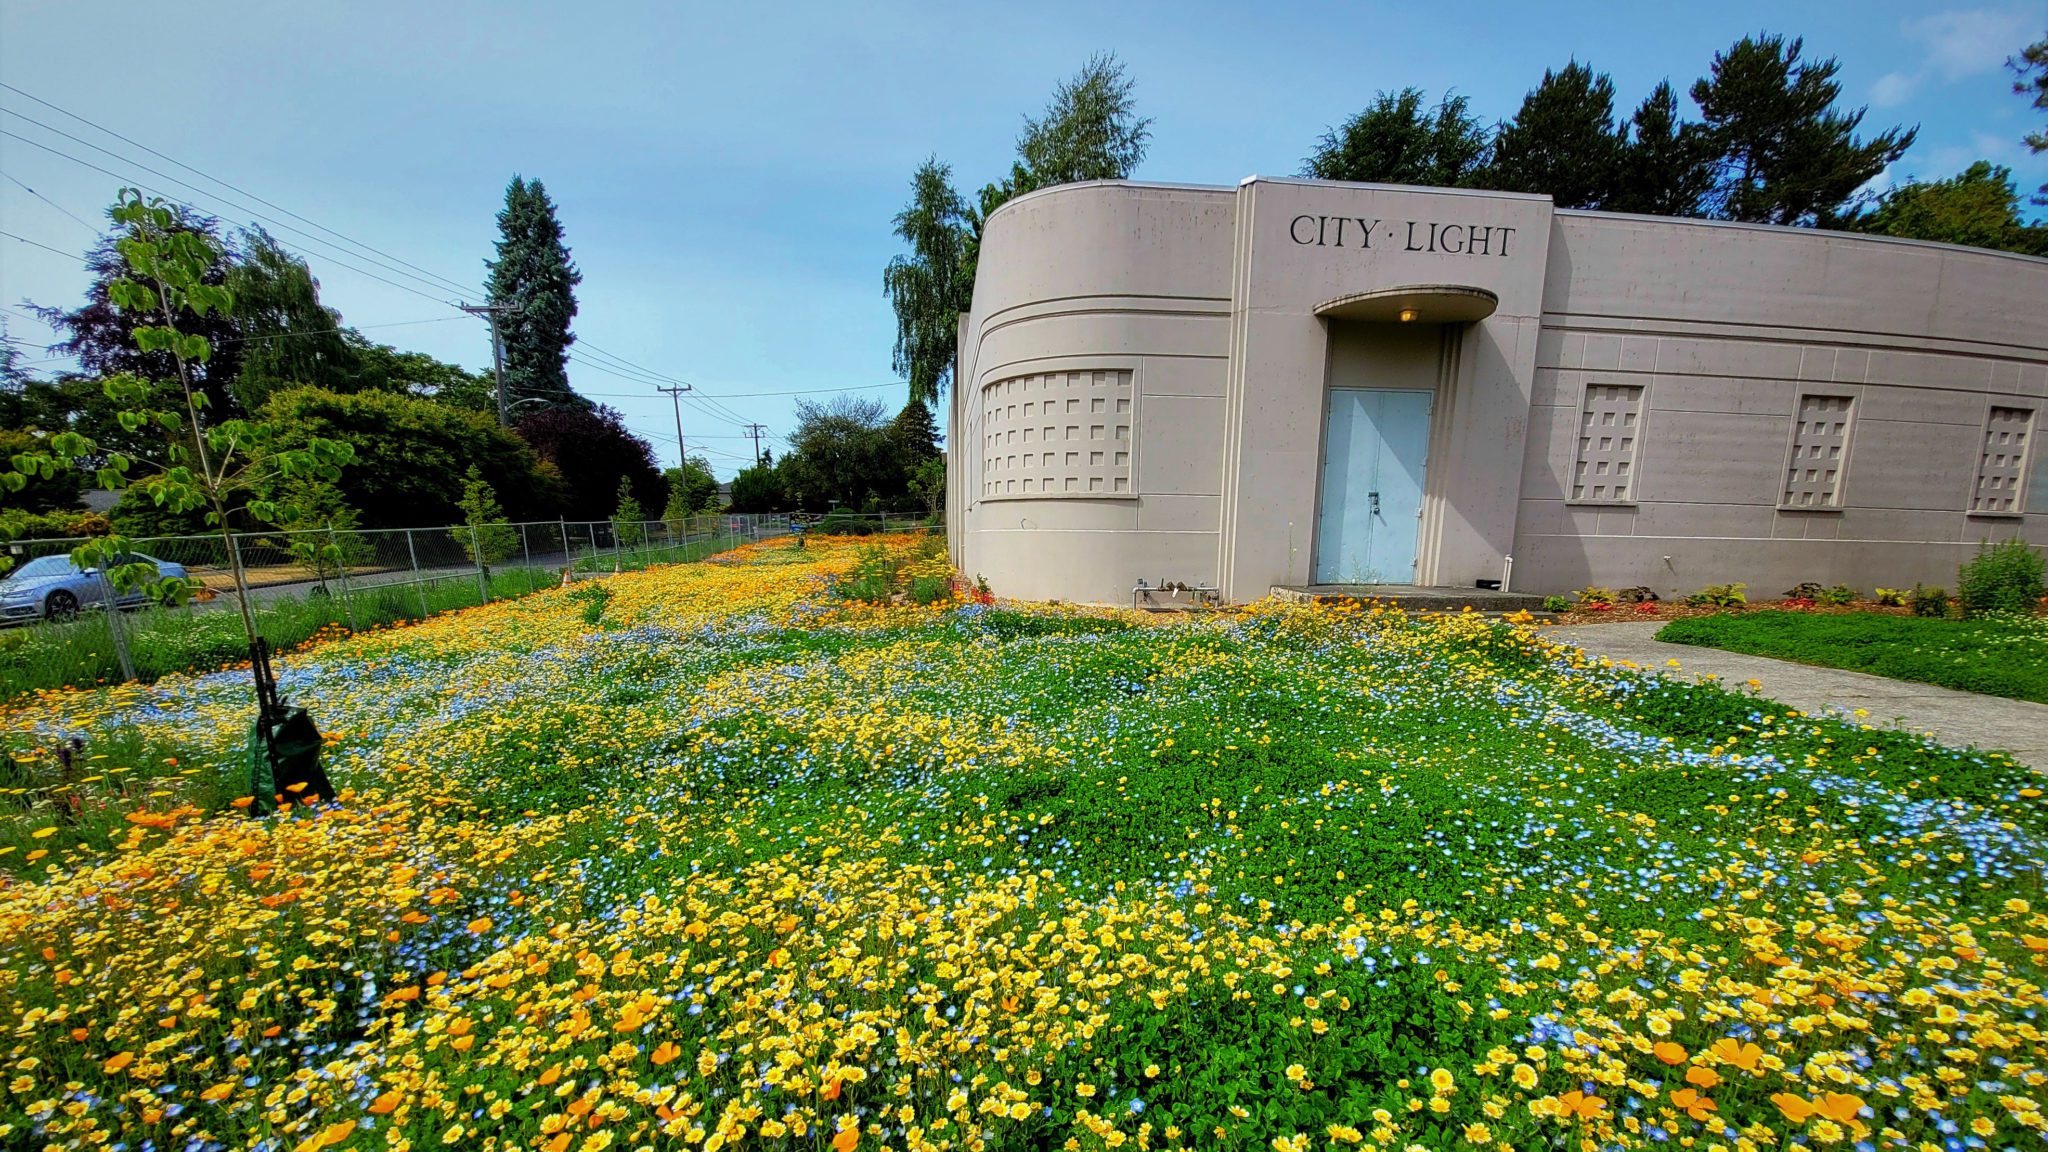 Native grasses and flowers in the landscaping of City Light's Magnolia Substation